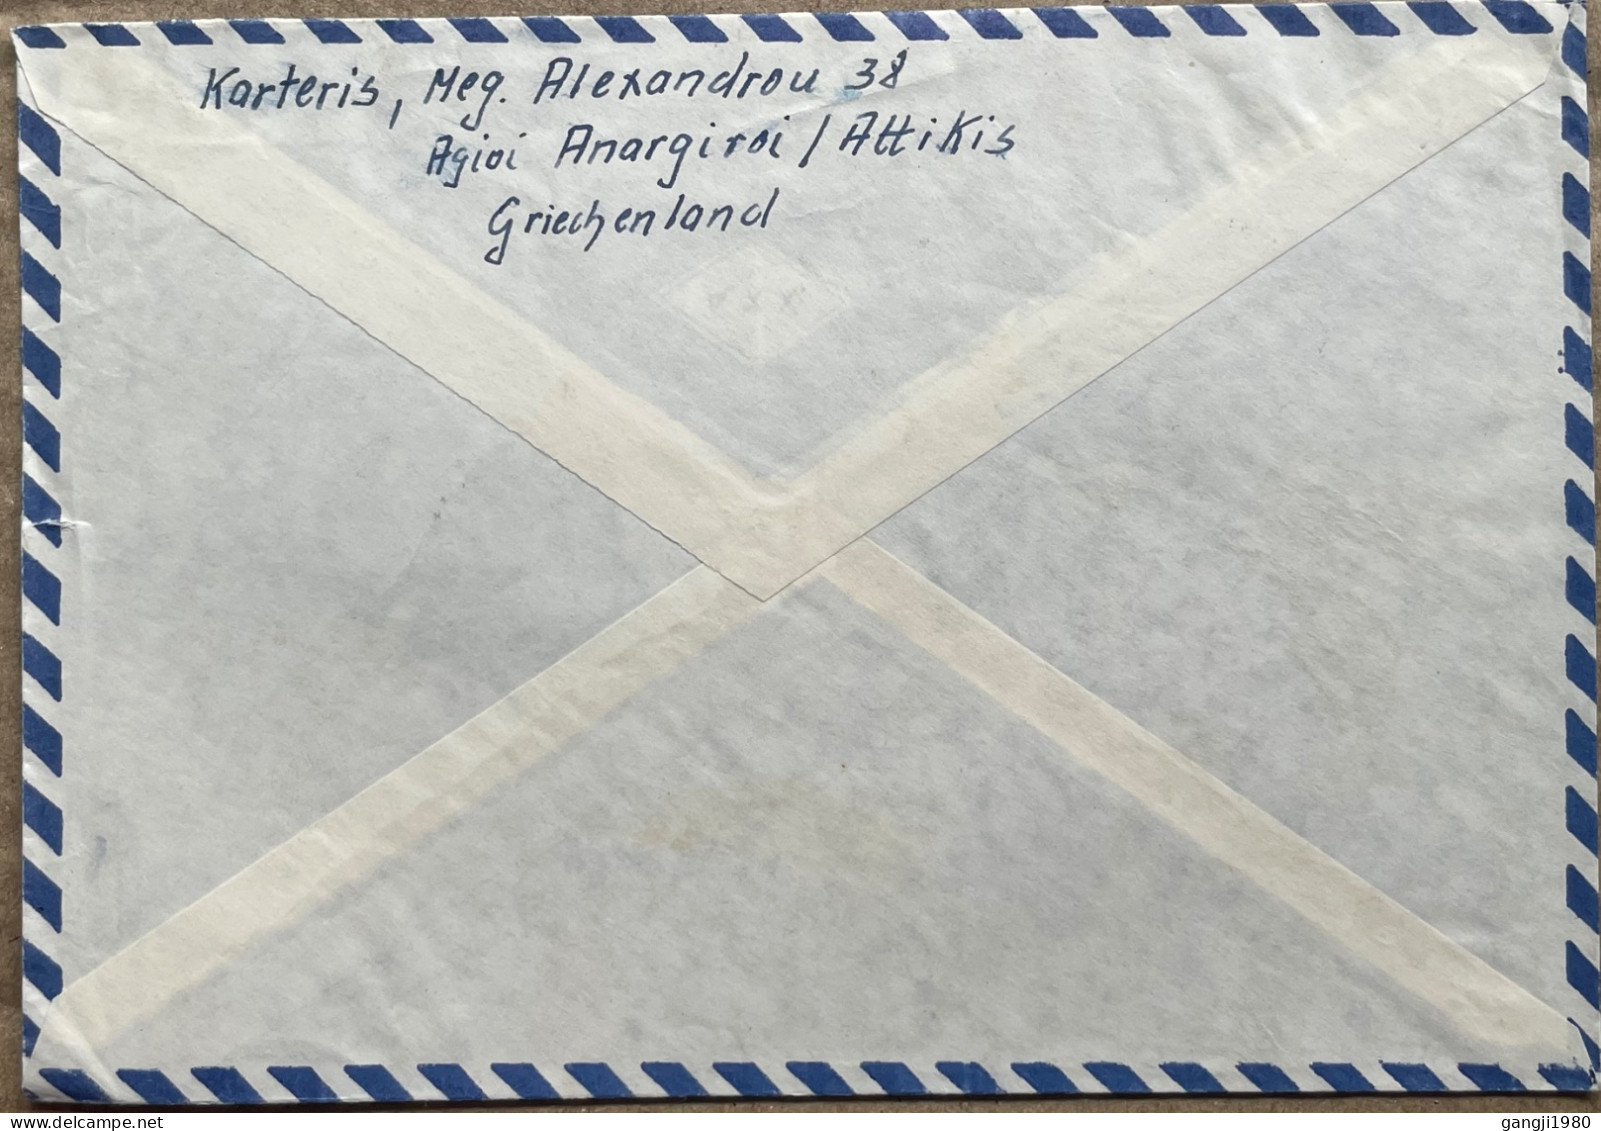 GREECE 1968, COVER USED TO GERMANY, BOXED RETURN FOR PAYMENT OF RE MAILING, 3 DIFF STAMP, RHODE MONUMENT, AIR FORCE AIRC - Cartas & Documentos